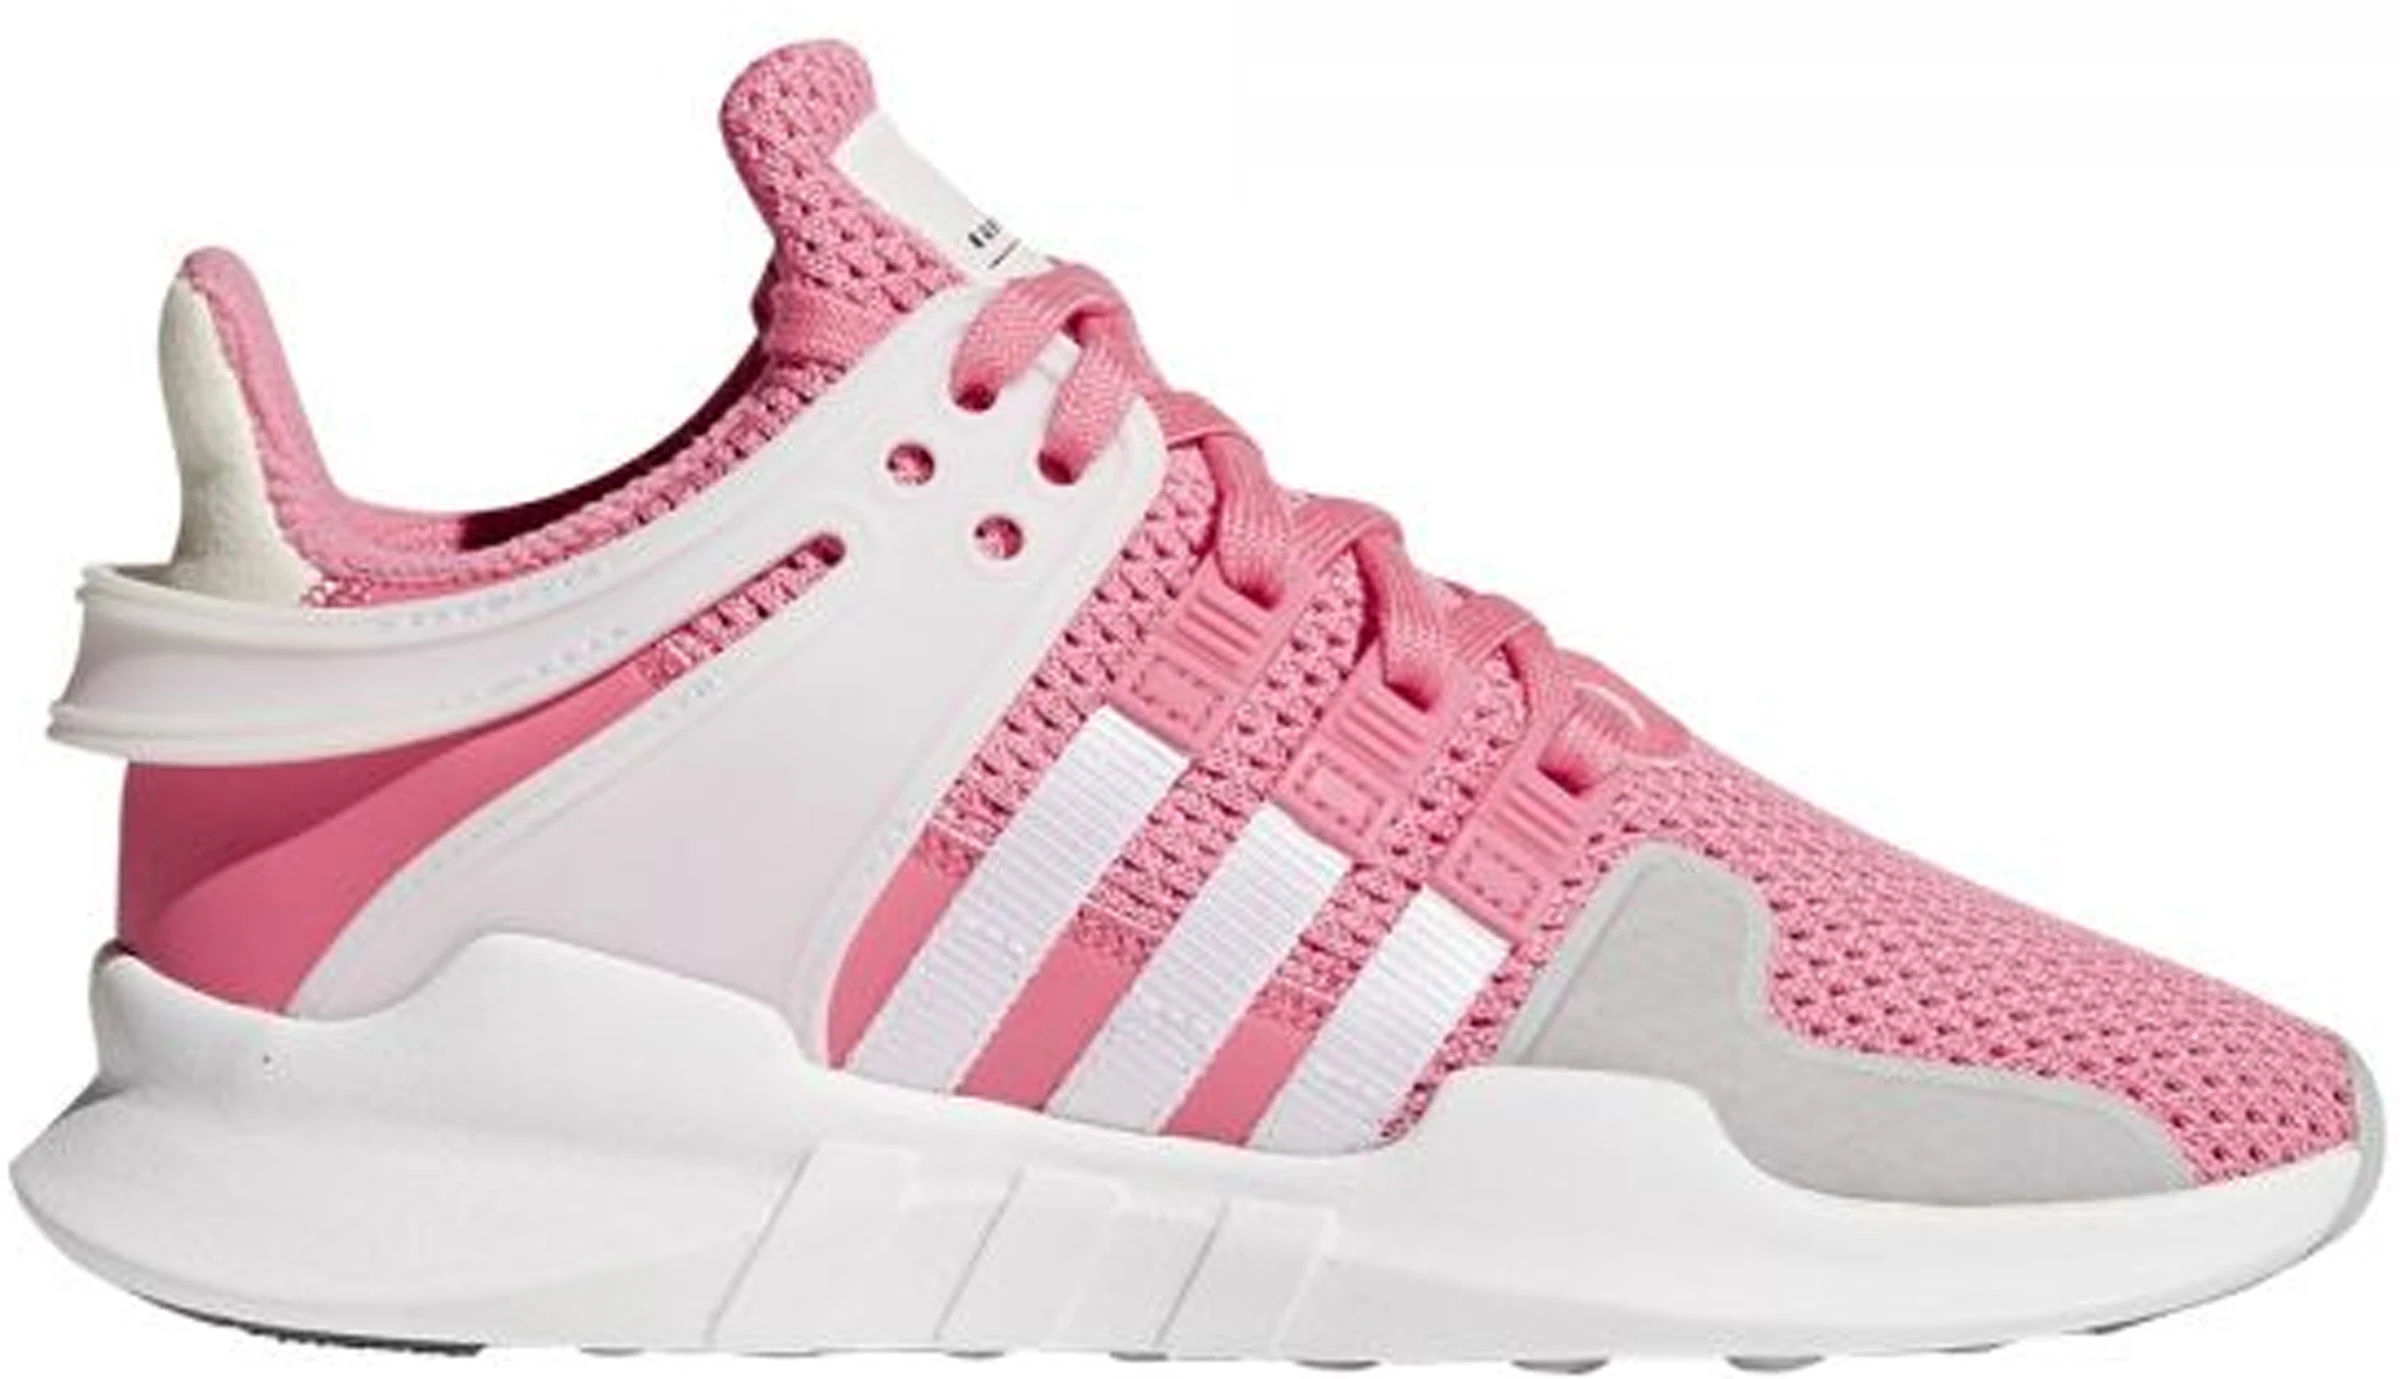 EQT Support Adv Pink White (Youth) - AC8421 - ES